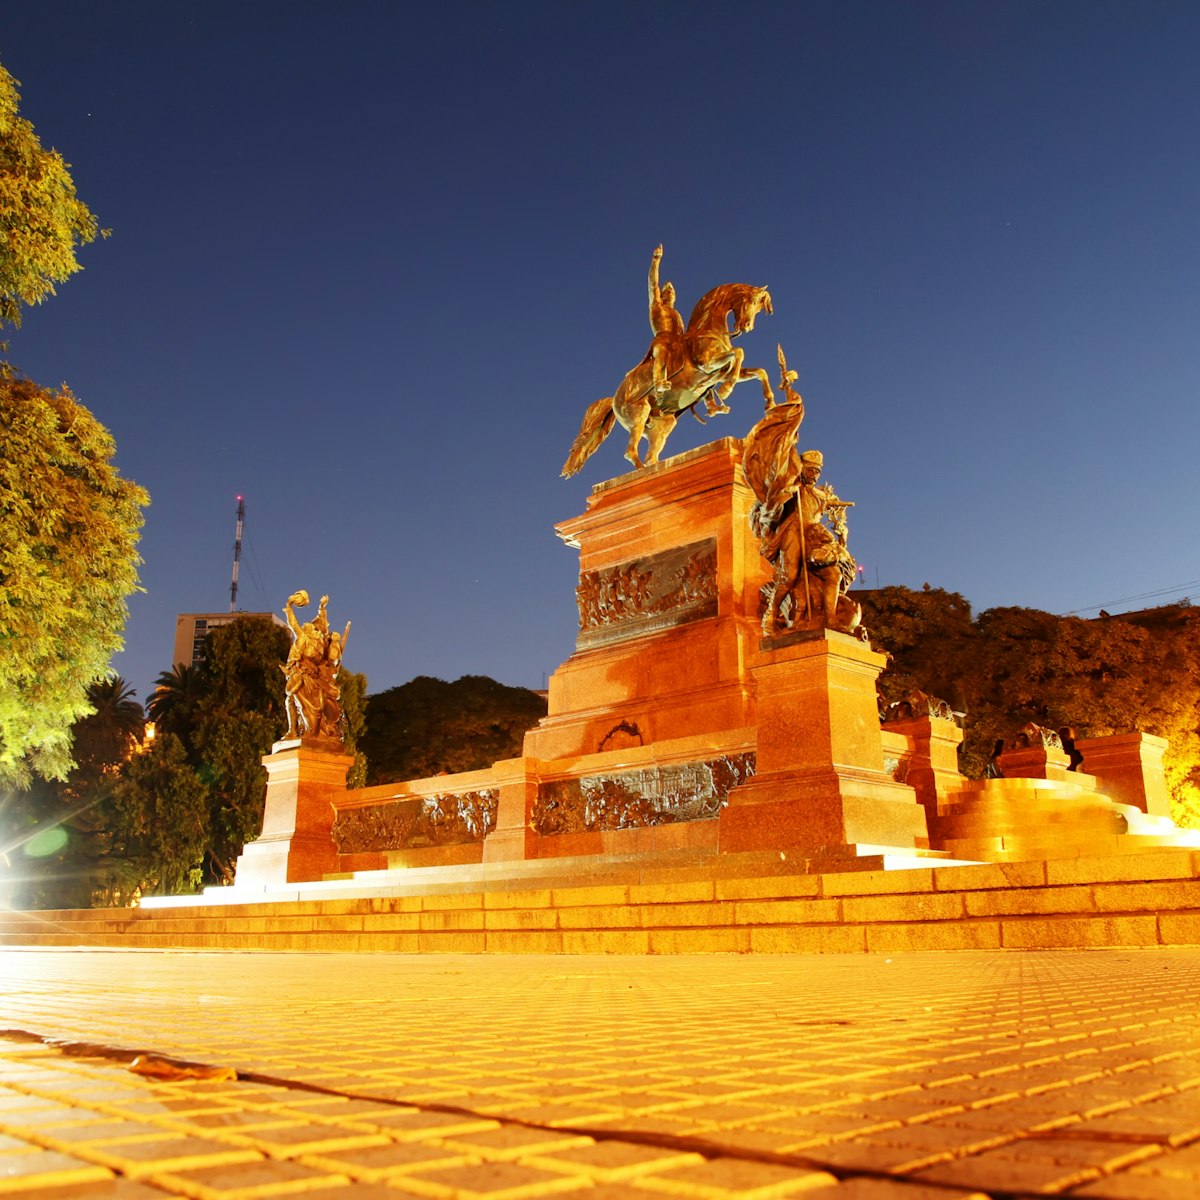 500px Photo ID: 163678813 - Night shot of the Monument of General San Martin in Buenos Aires, Argentina.